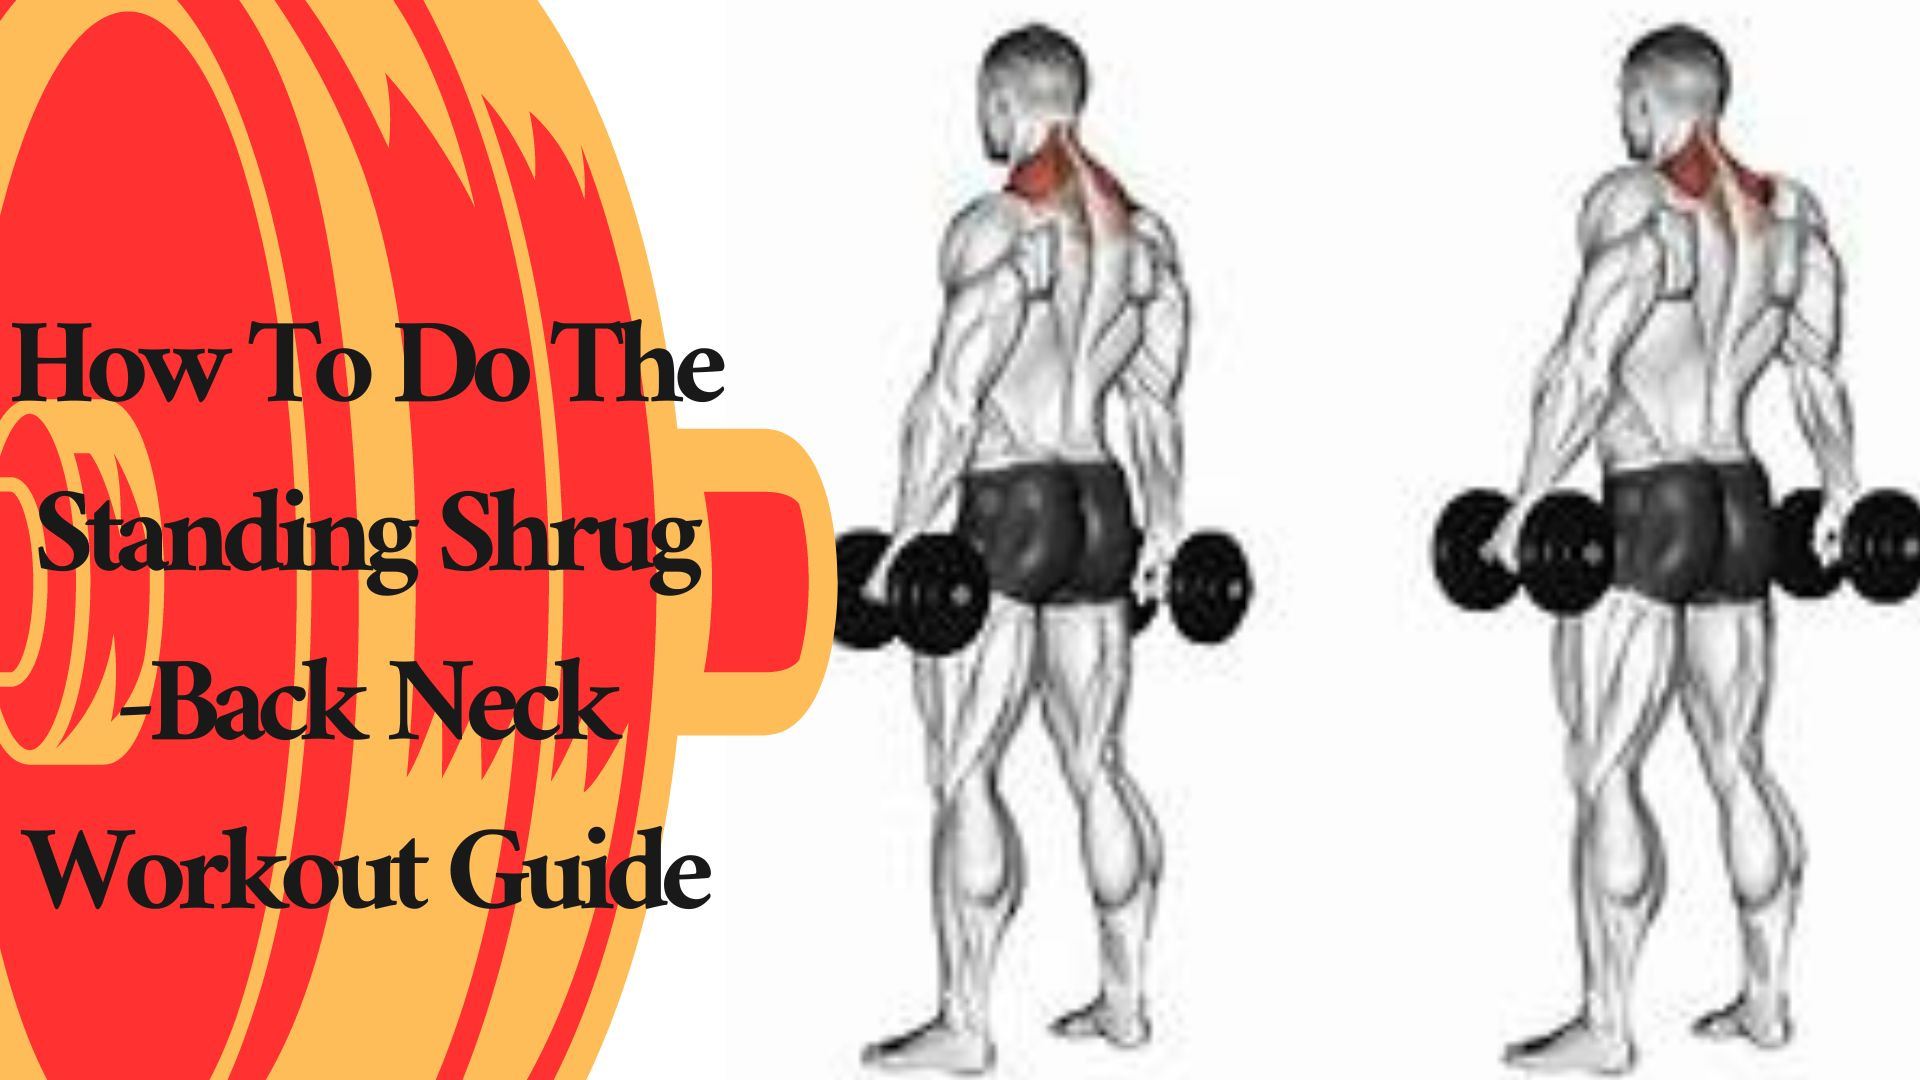 How To Do The Standing Shrug -Back Neck Workout Guide